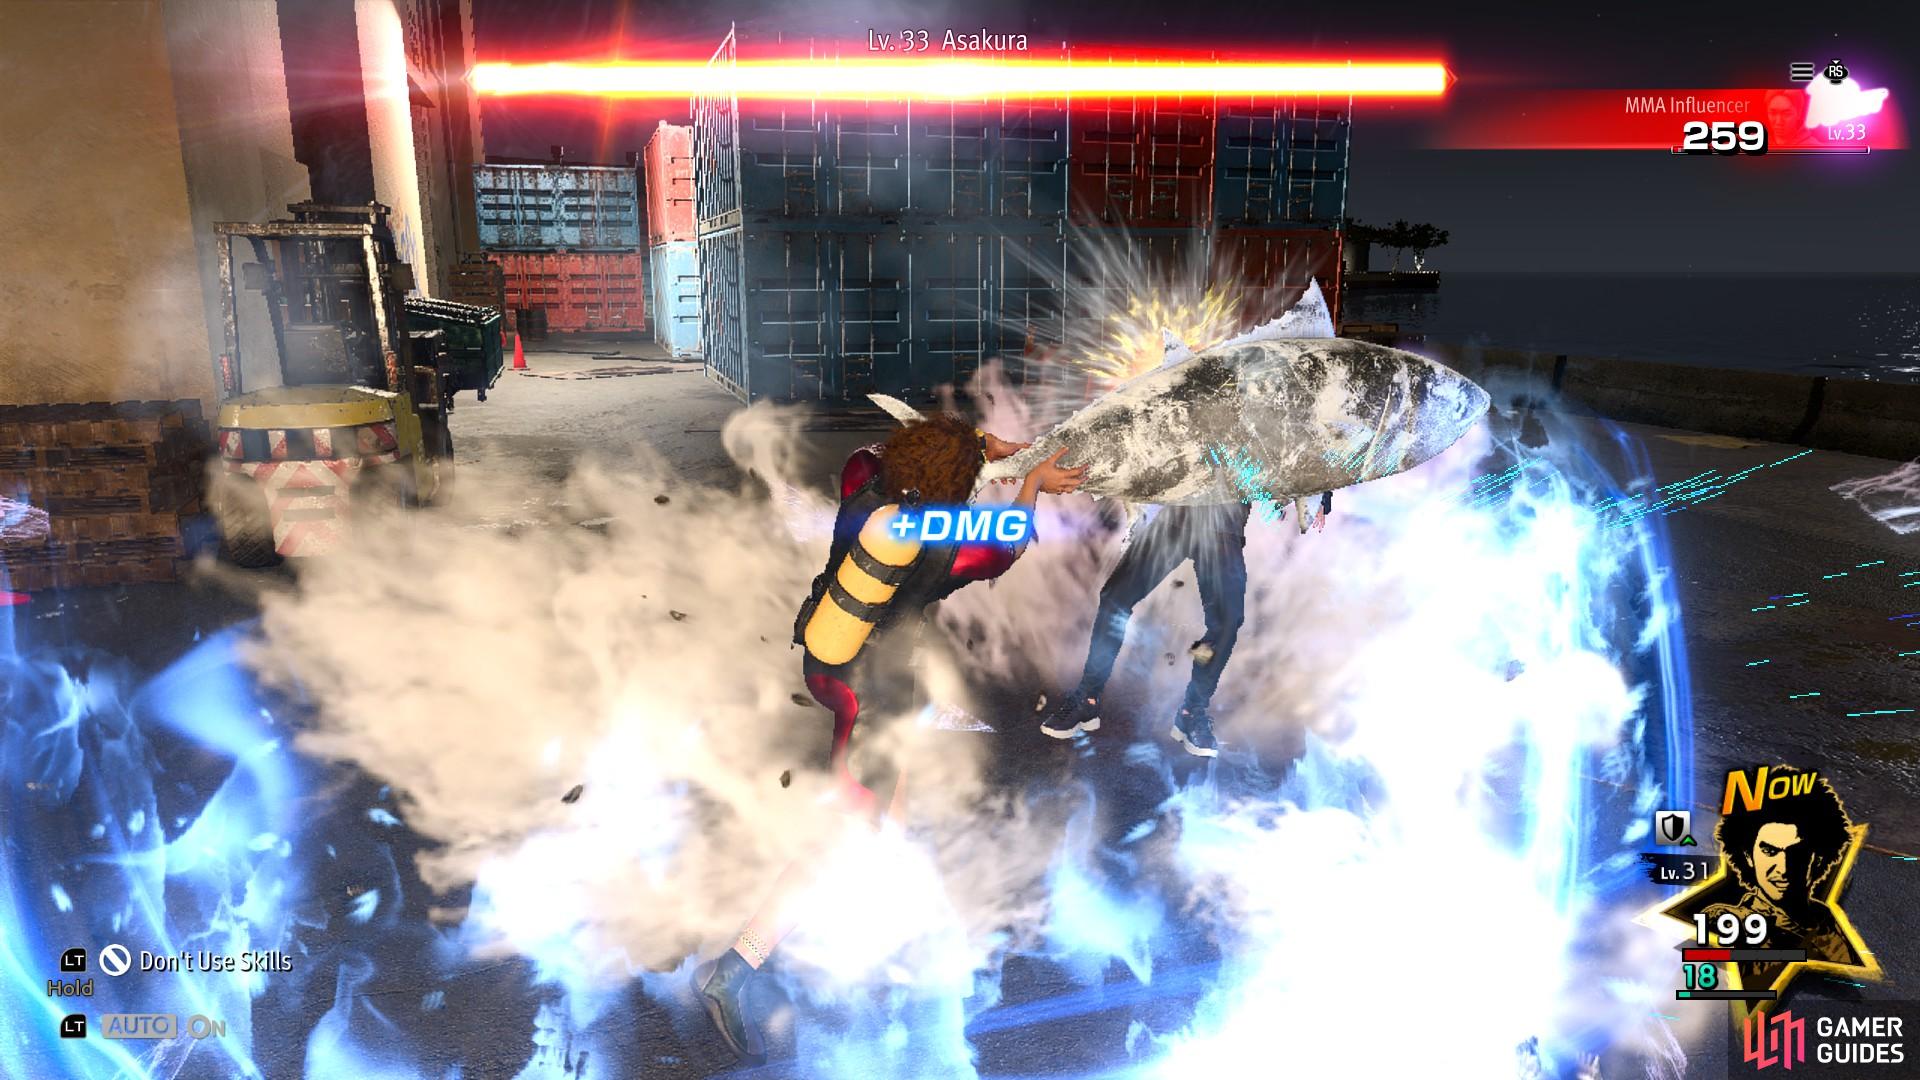 The last Asakura fight is a tricky one, with high damage moves draining Ichiban’s health bar.